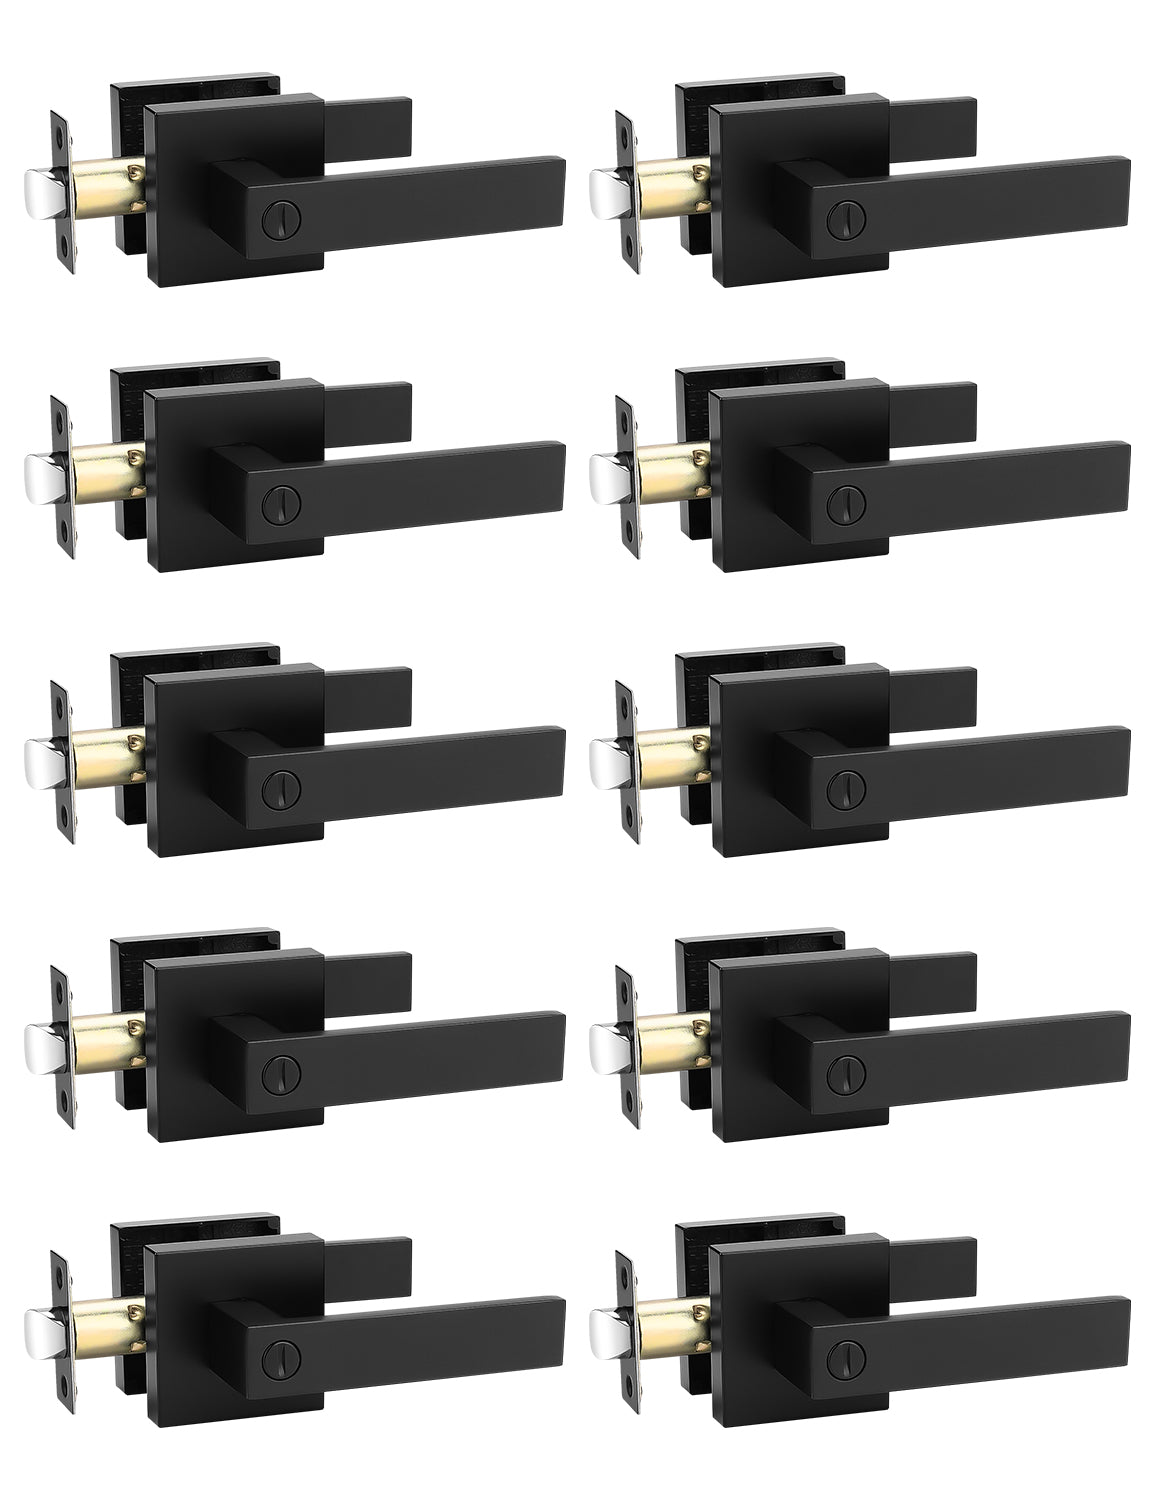 Tinewa 10 Pack Square Privacy Door Levers Locksets in Matte Black Finish, Bed/Bath Door Levers Keyless Interior Handles,Reversible for Left Right Handed Doors